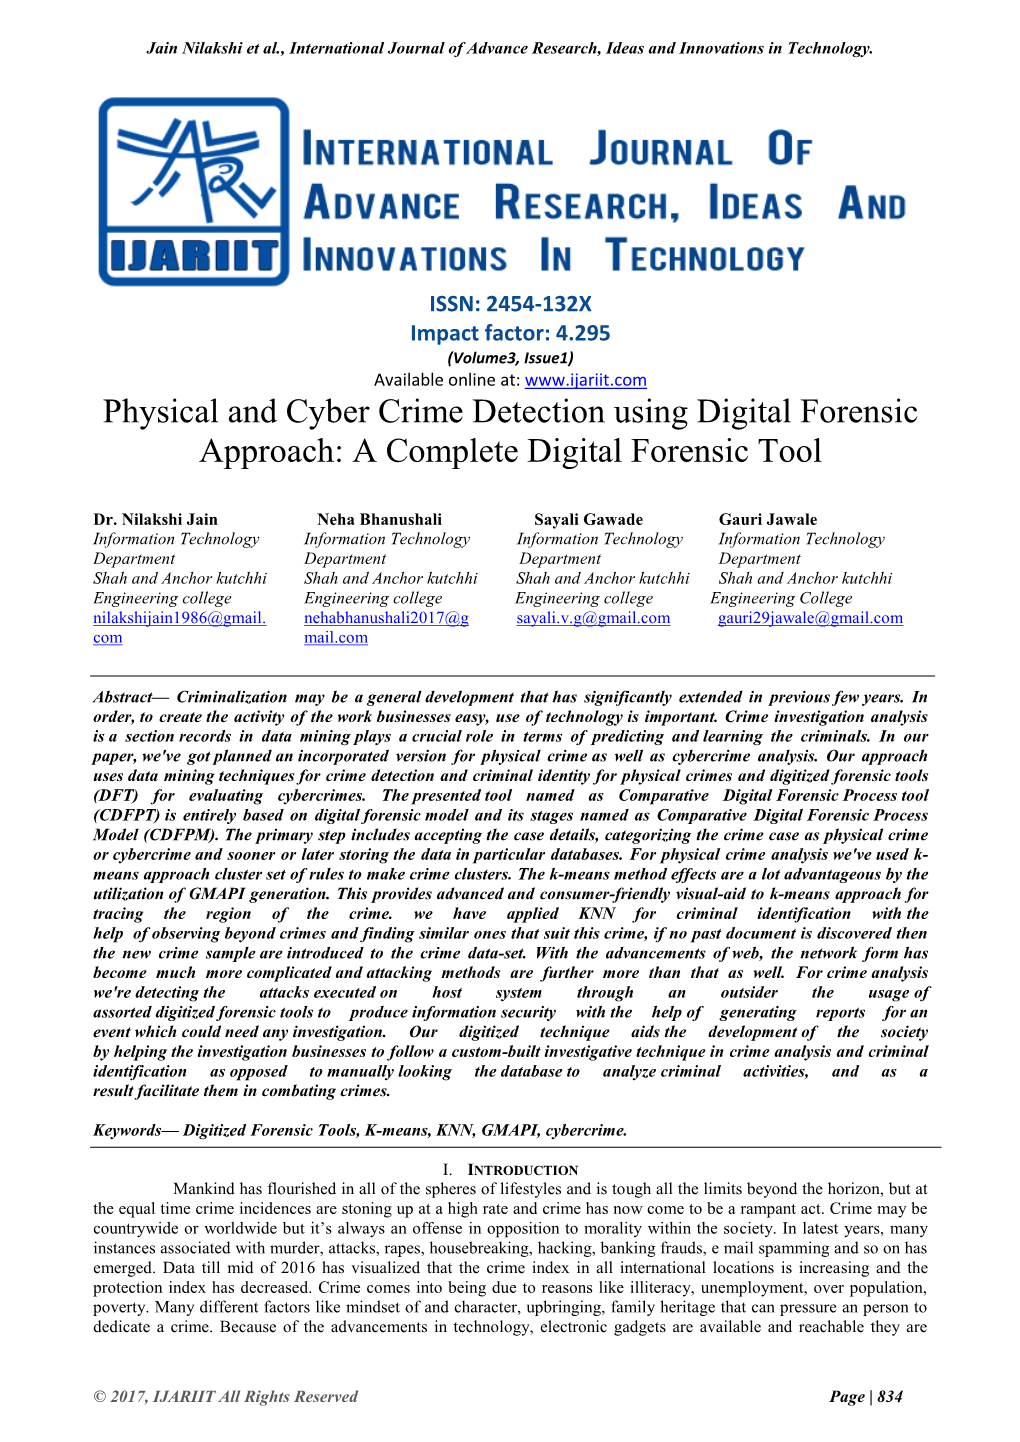 Physical and Cyber Crime Detection Using Digital Forensic Approach: a Complete Digital Forensic Tool